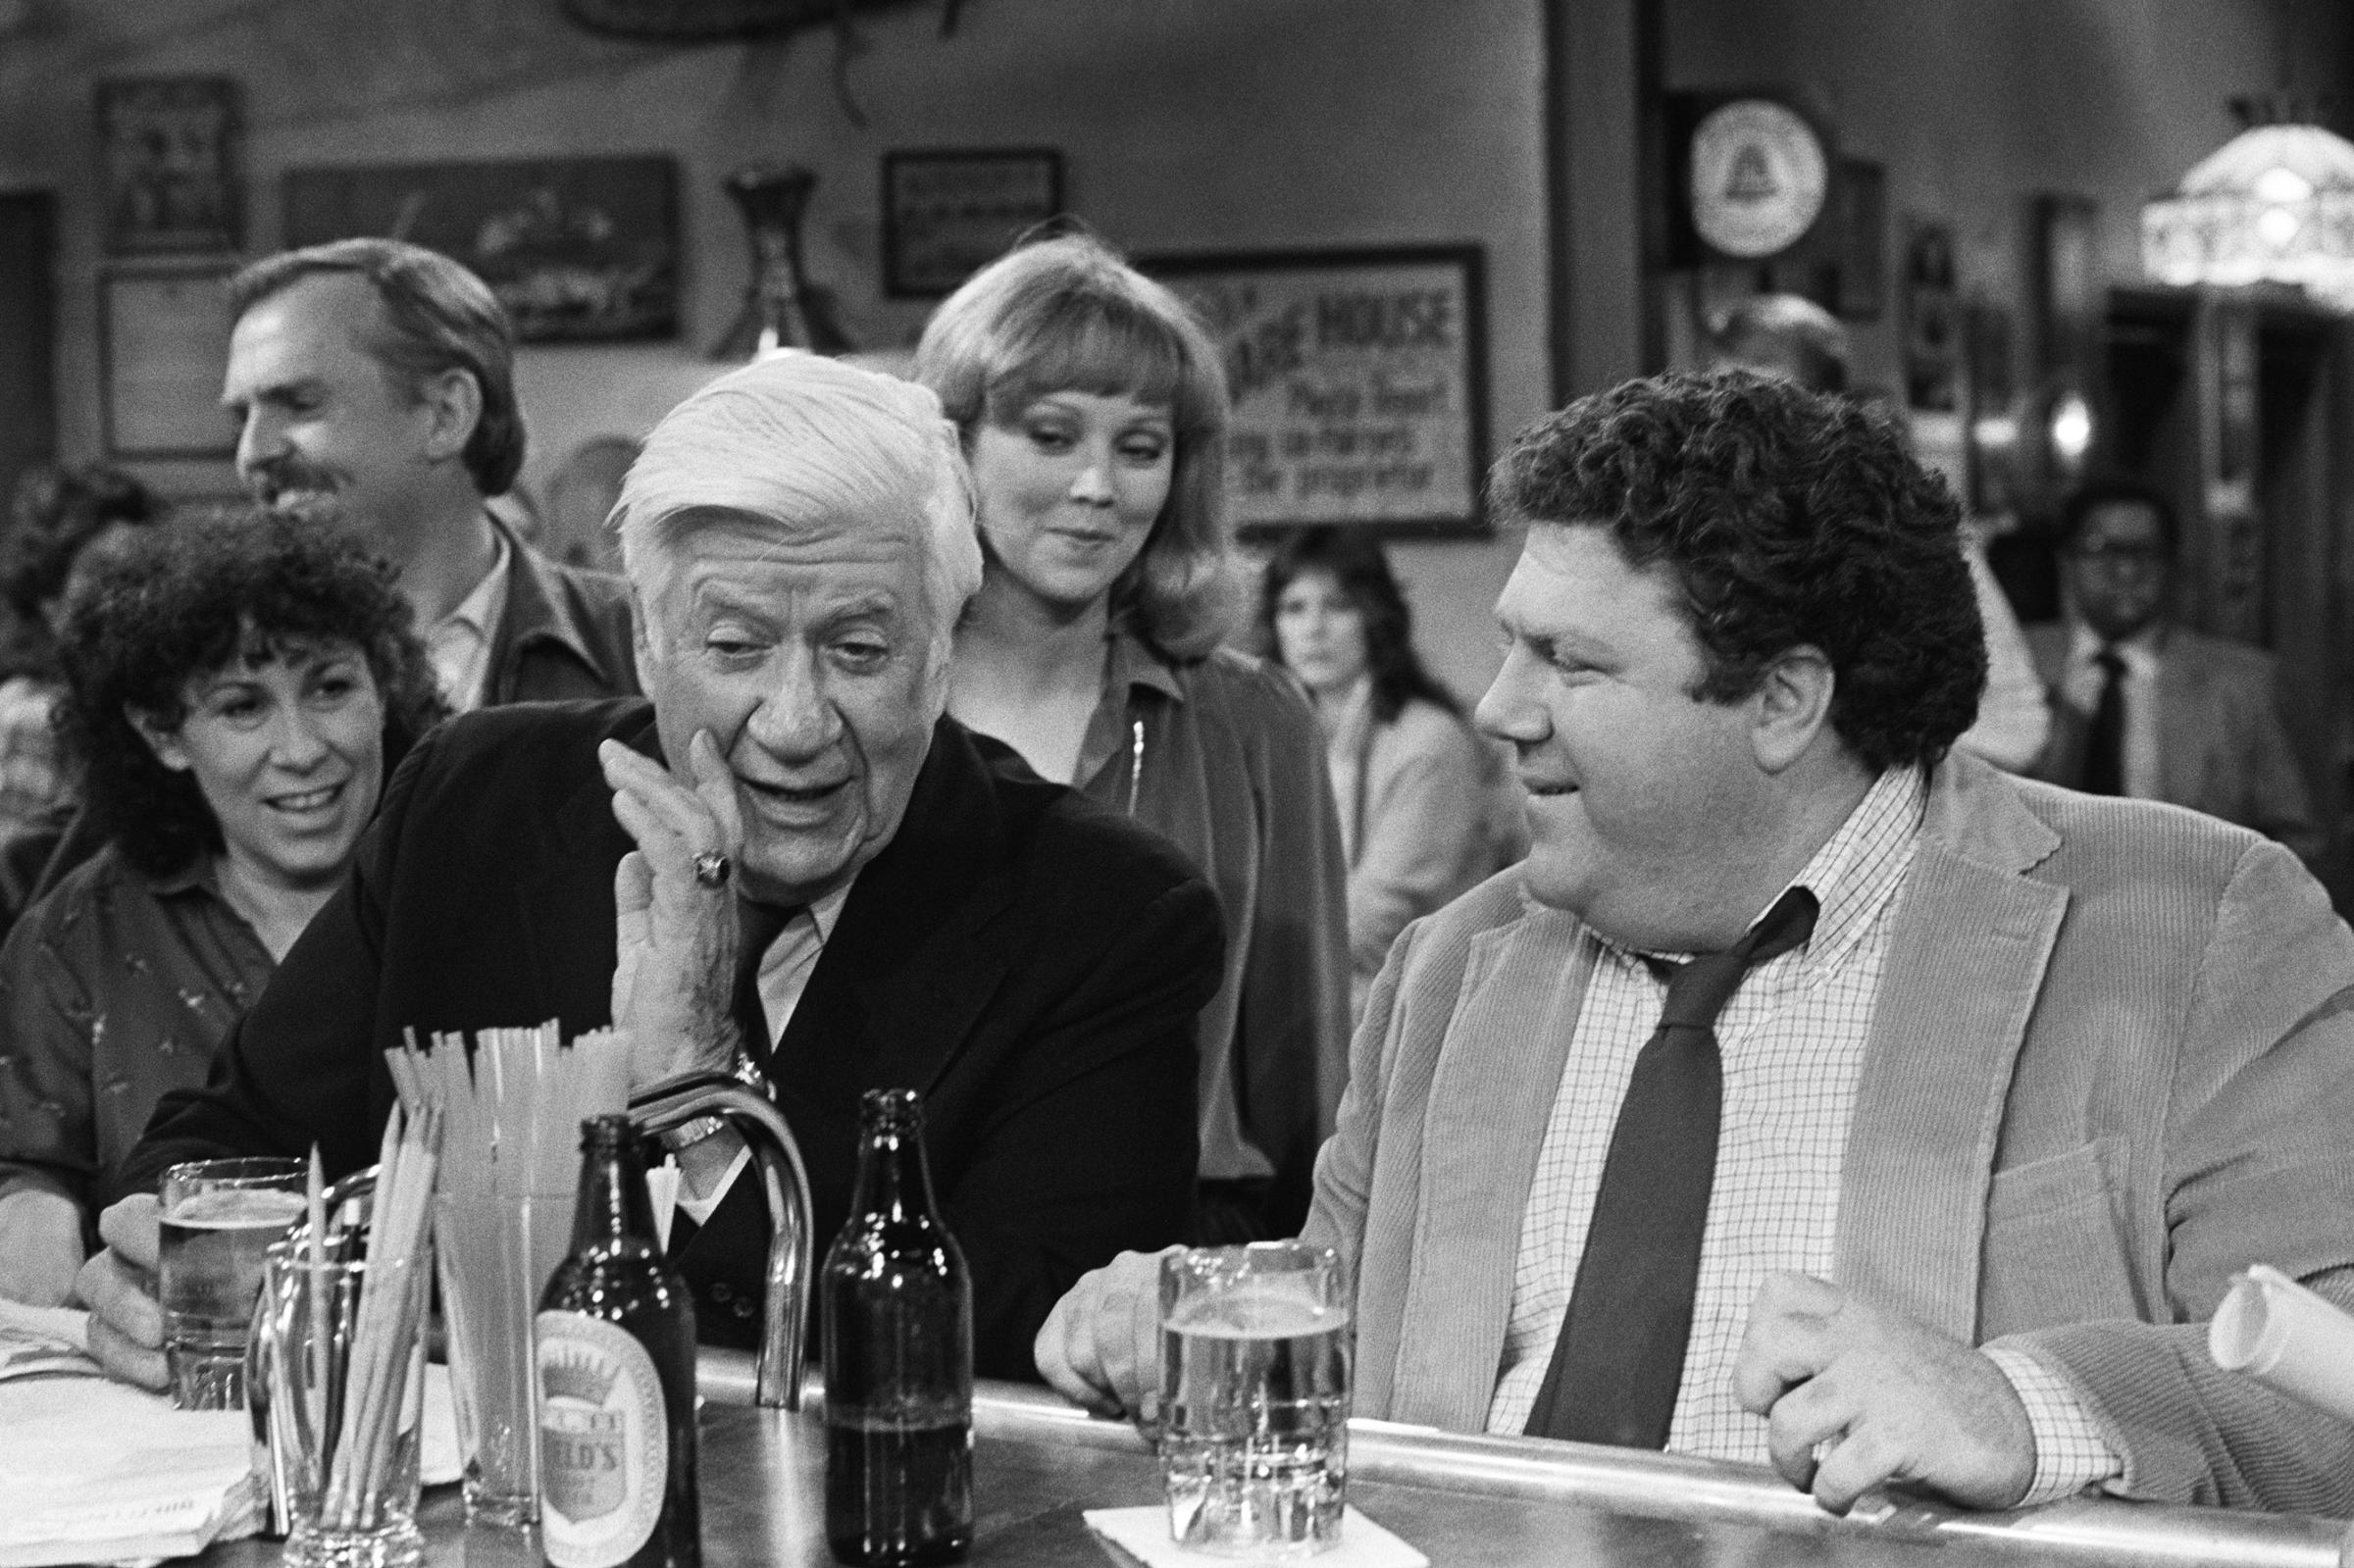 From left: Rhea Perlman, John Ratzenberger, Thomas P. "Tip" O'Neill, Shelley Long, and George Wendt on Cheers, 1983.